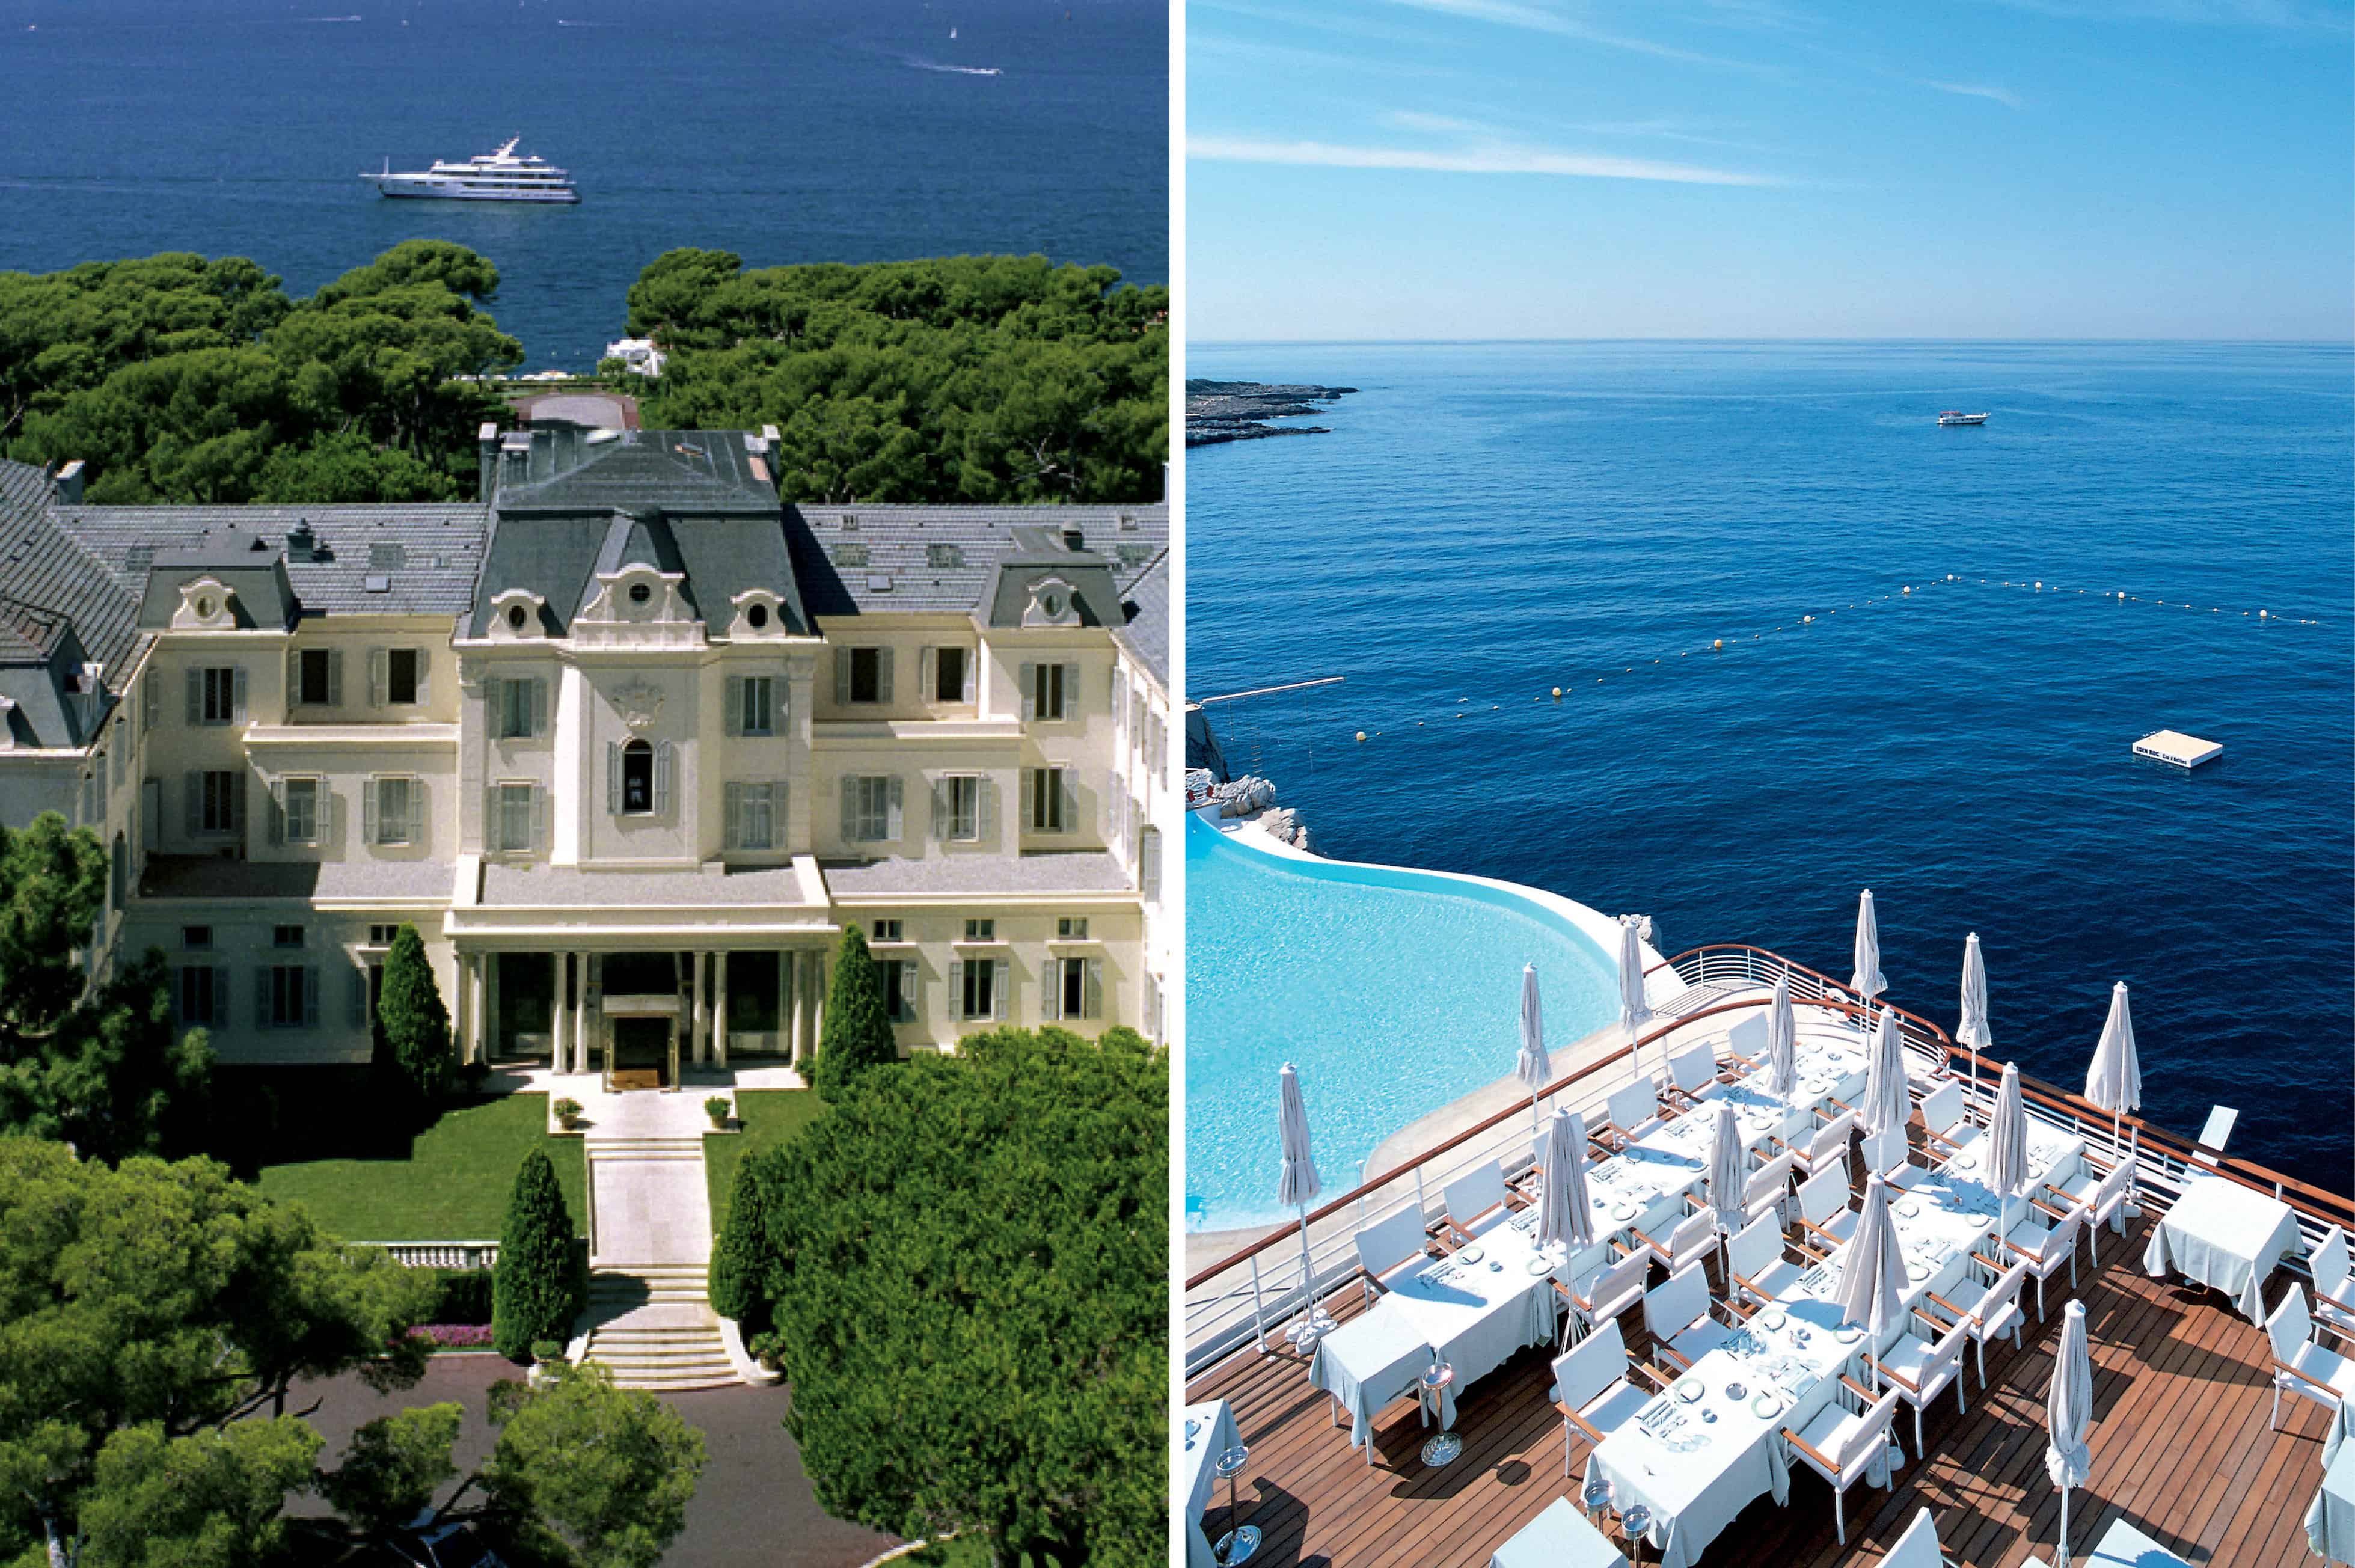 Hotel du Cap Eden Roc aerial view and pool and waterfront in the South of France